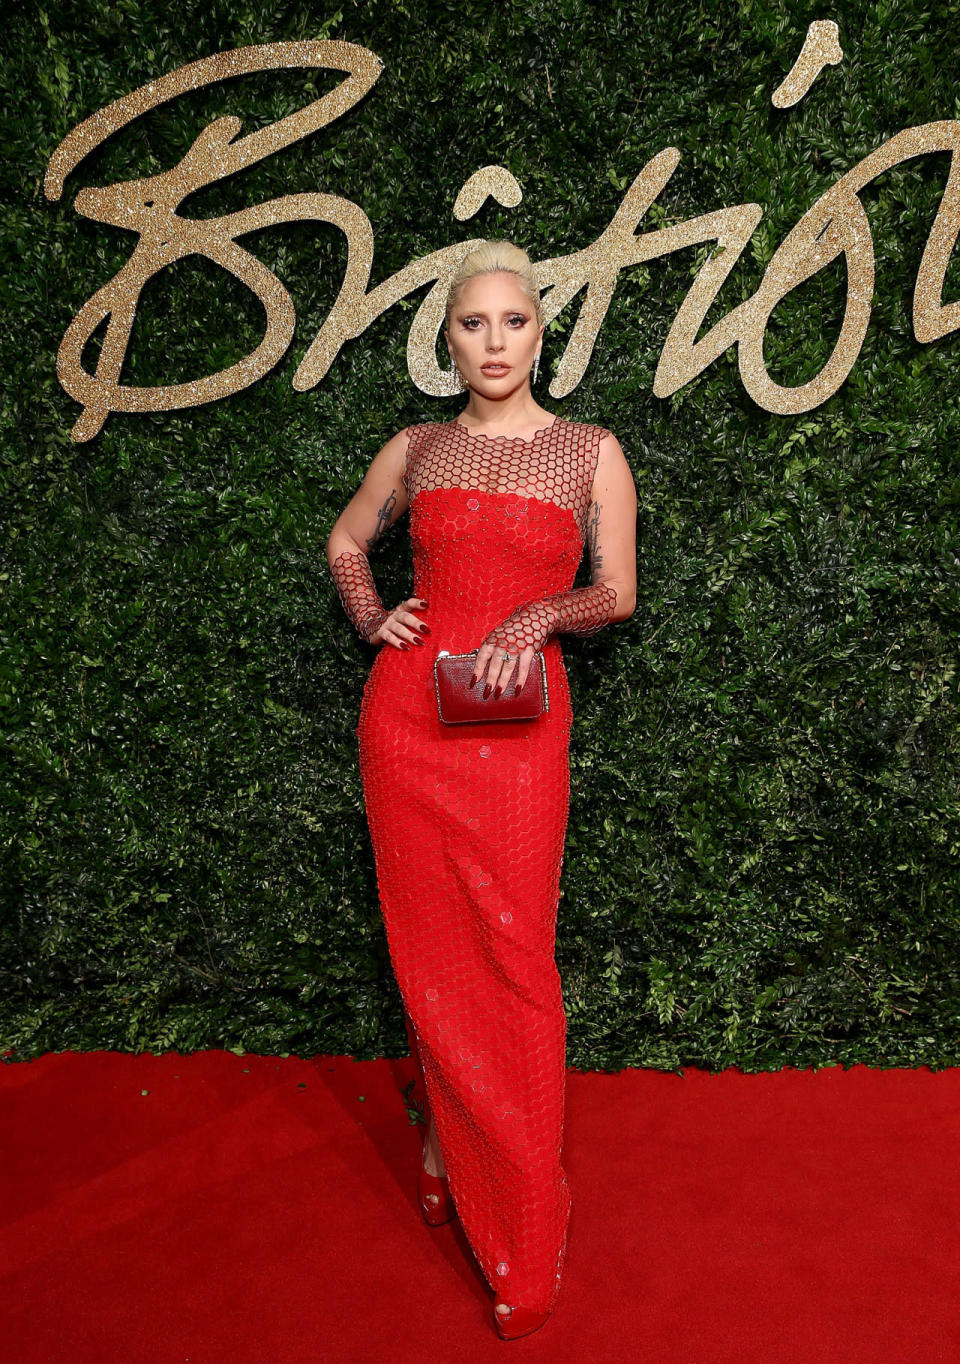 Lady Gaga in a red gown and fingerless gloves with honeycomb detailing by Tom Ford.